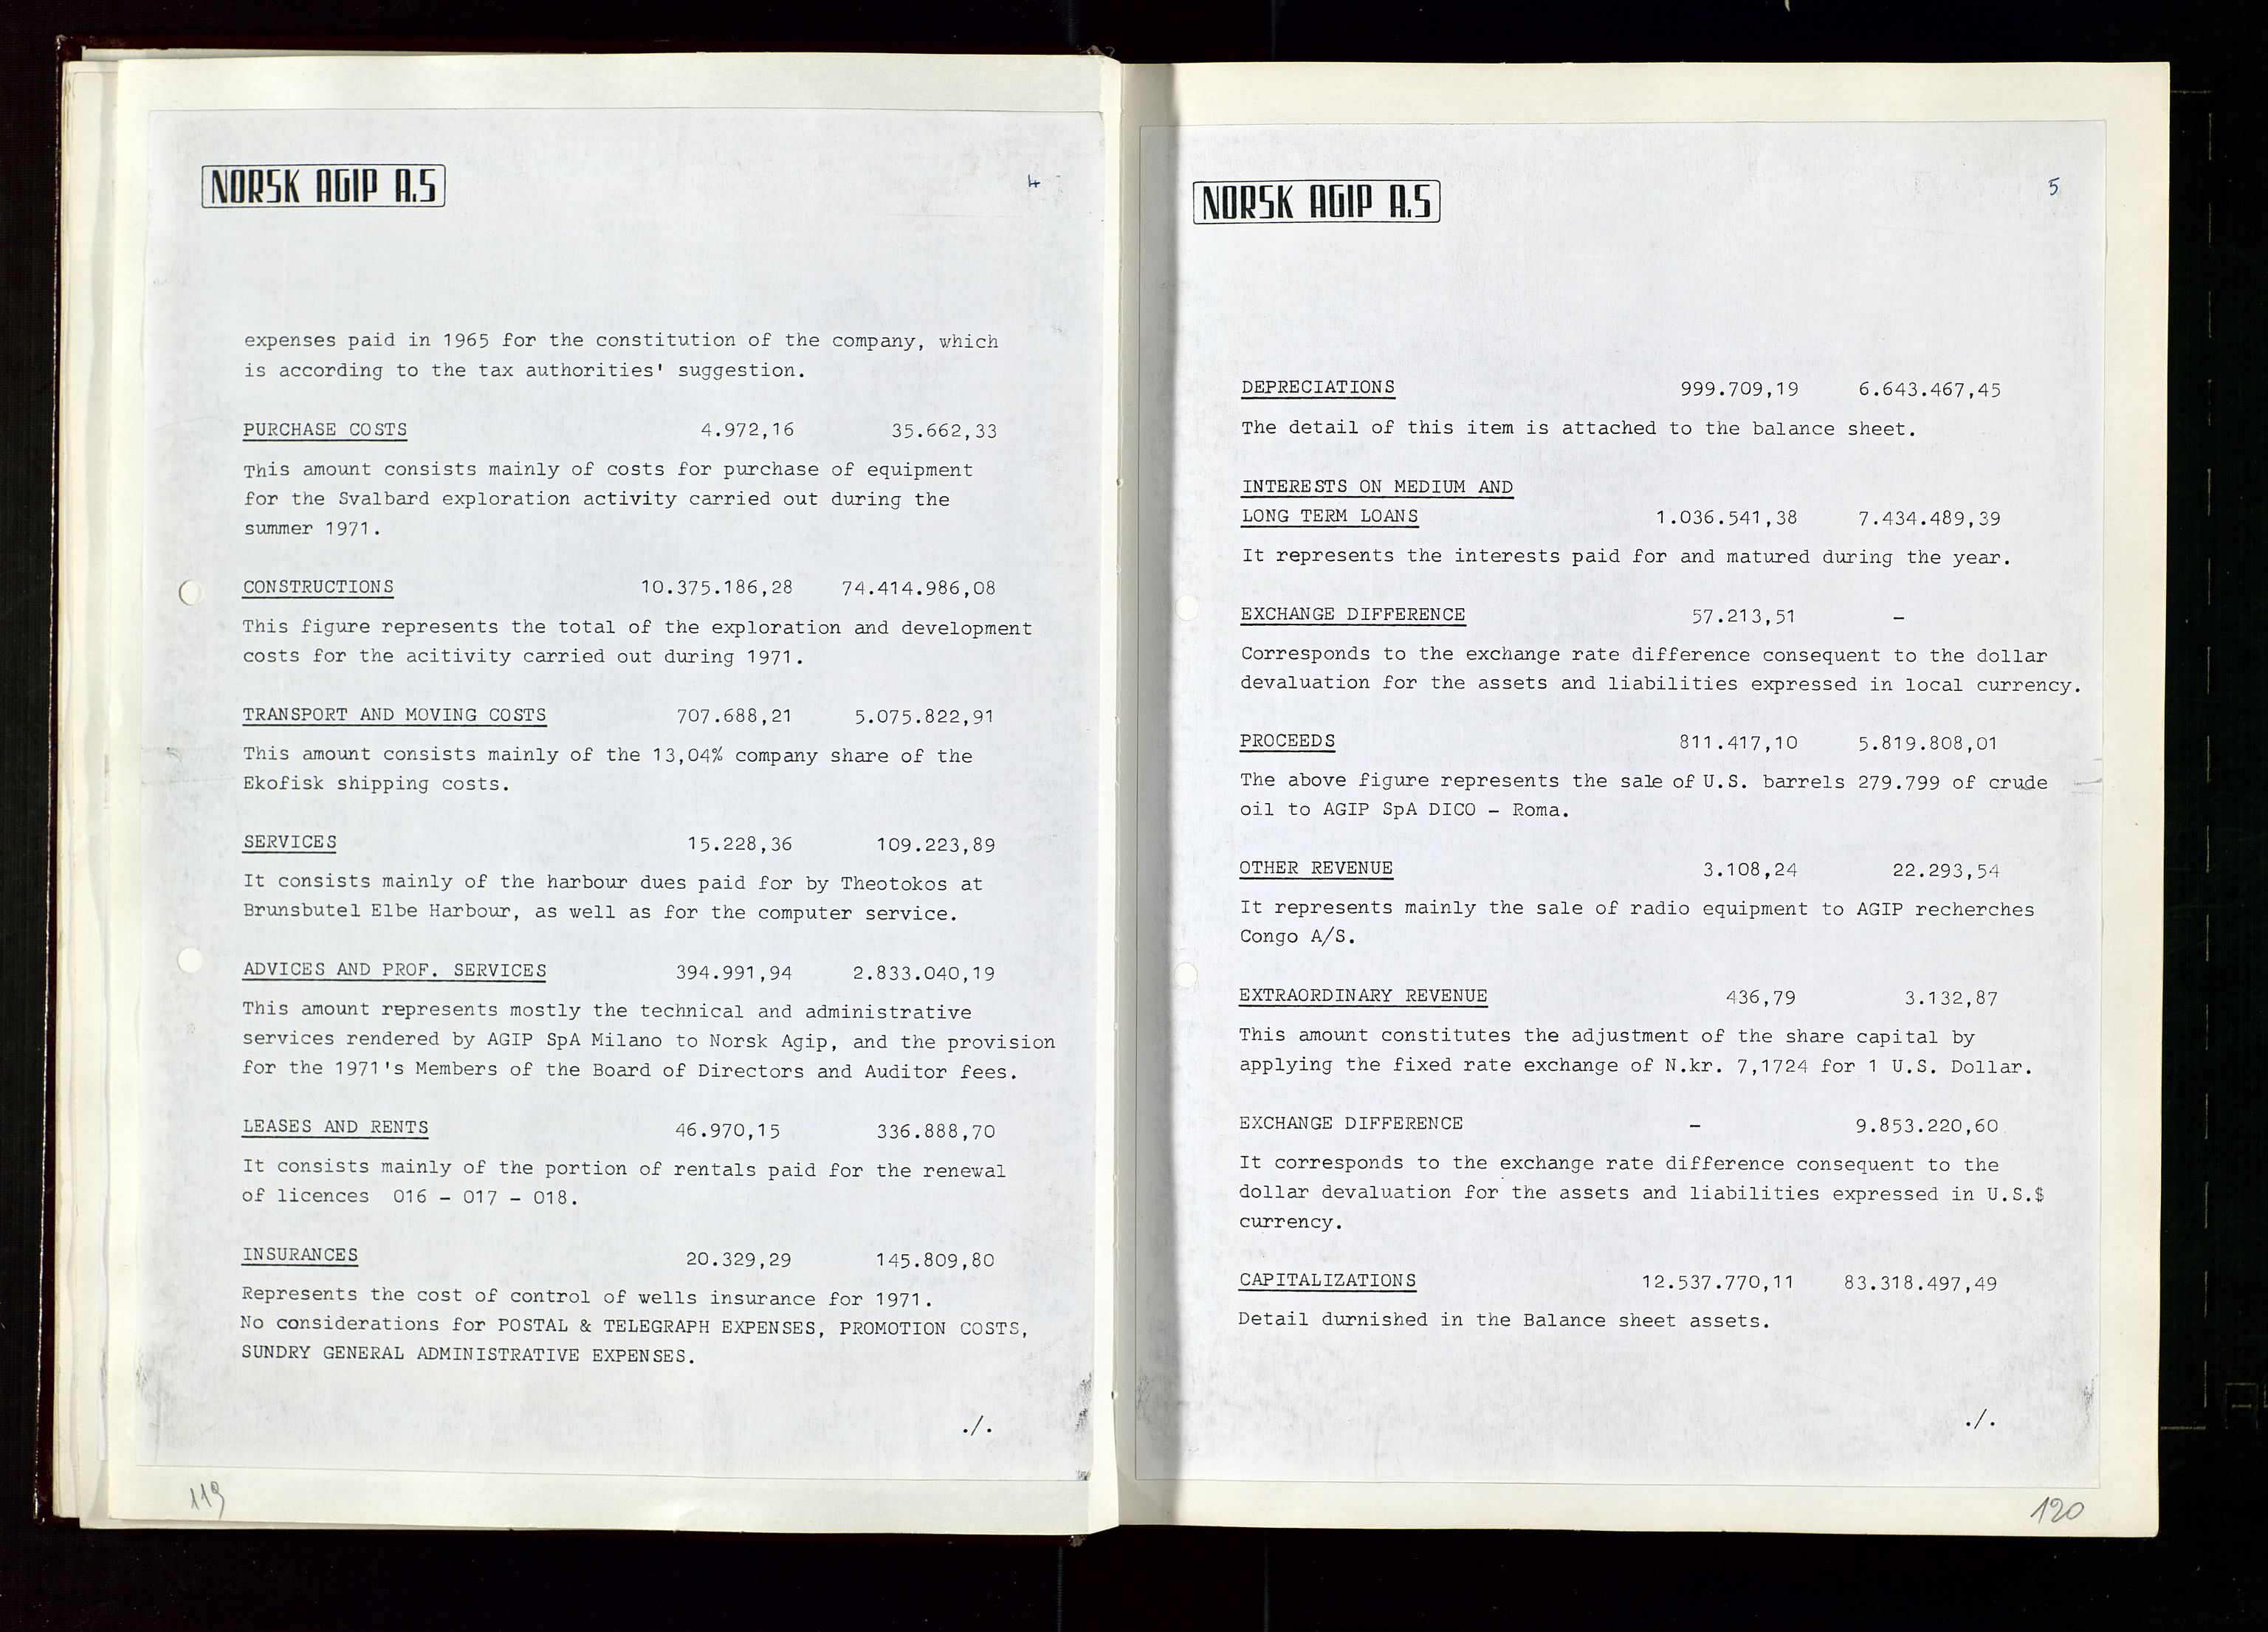 Pa 1583 - Norsk Agip AS, SAST/A-102138/A/Aa/L0002: General assembly and Board of Directors meeting minutes, 1972-1979, s. 119-120